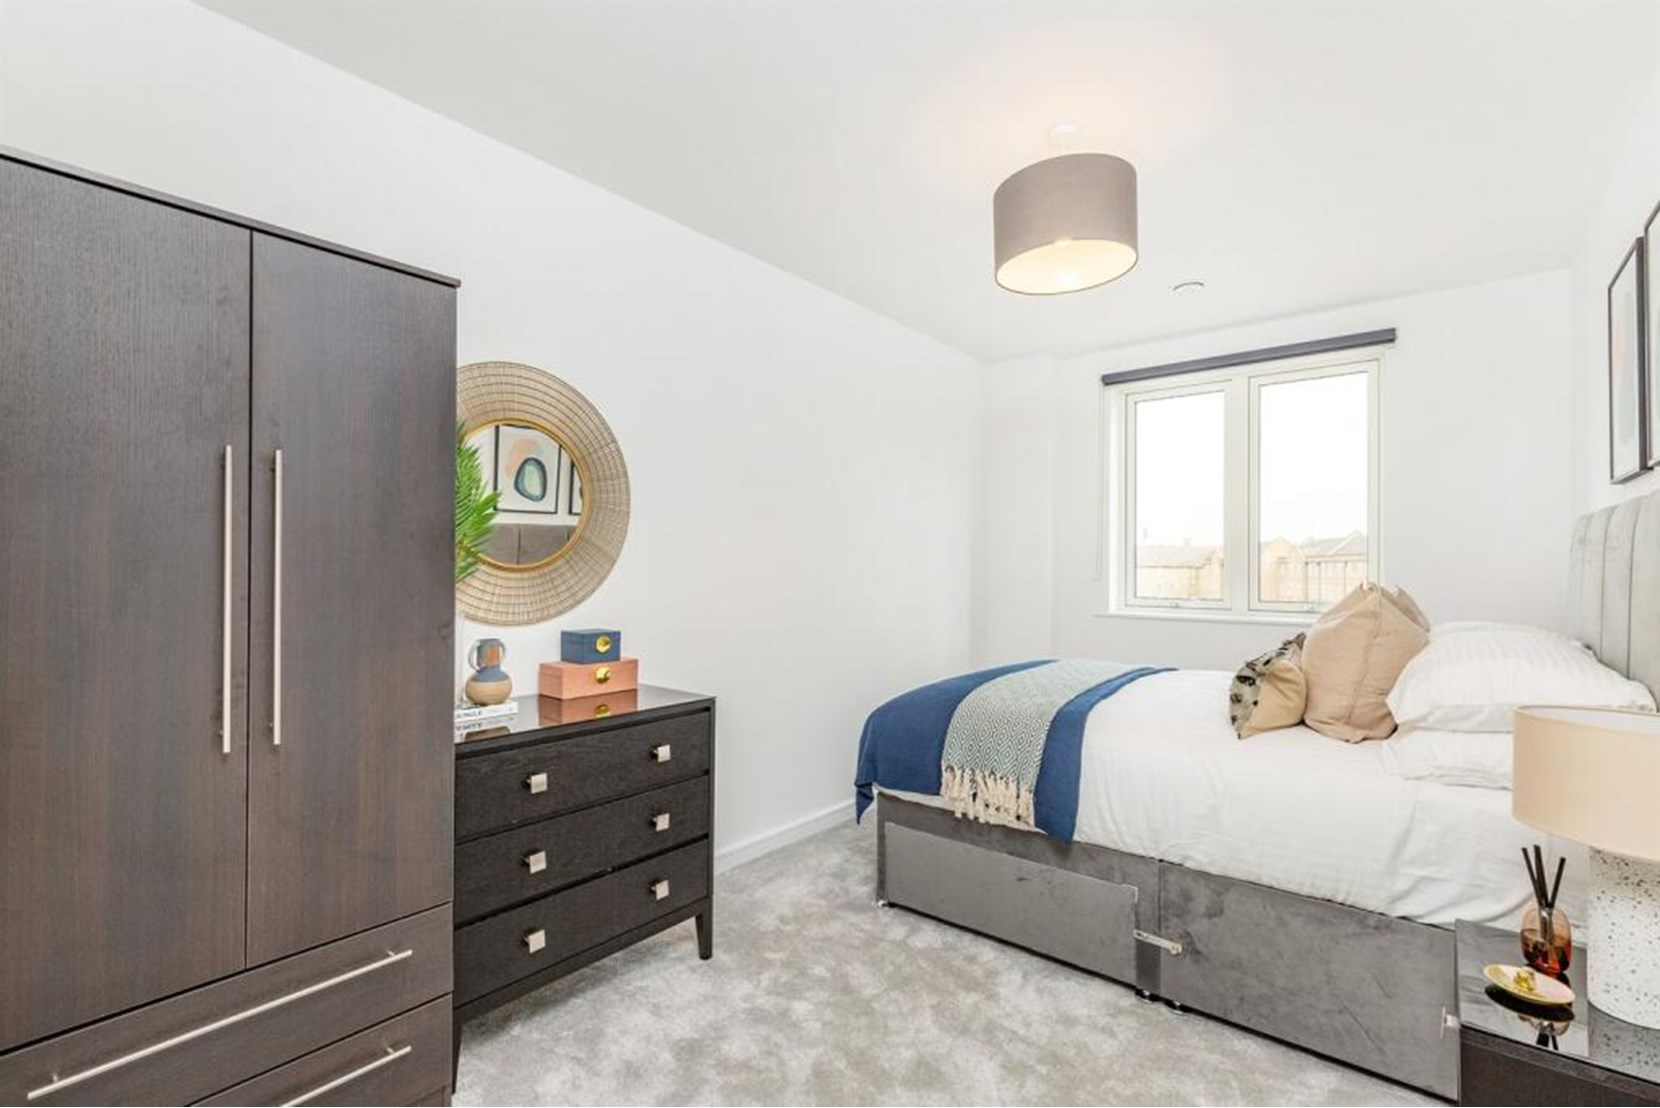 Apartments to Rent by Simple Life London in Ark Soane, Ealing, W3, The Beryl bedroom